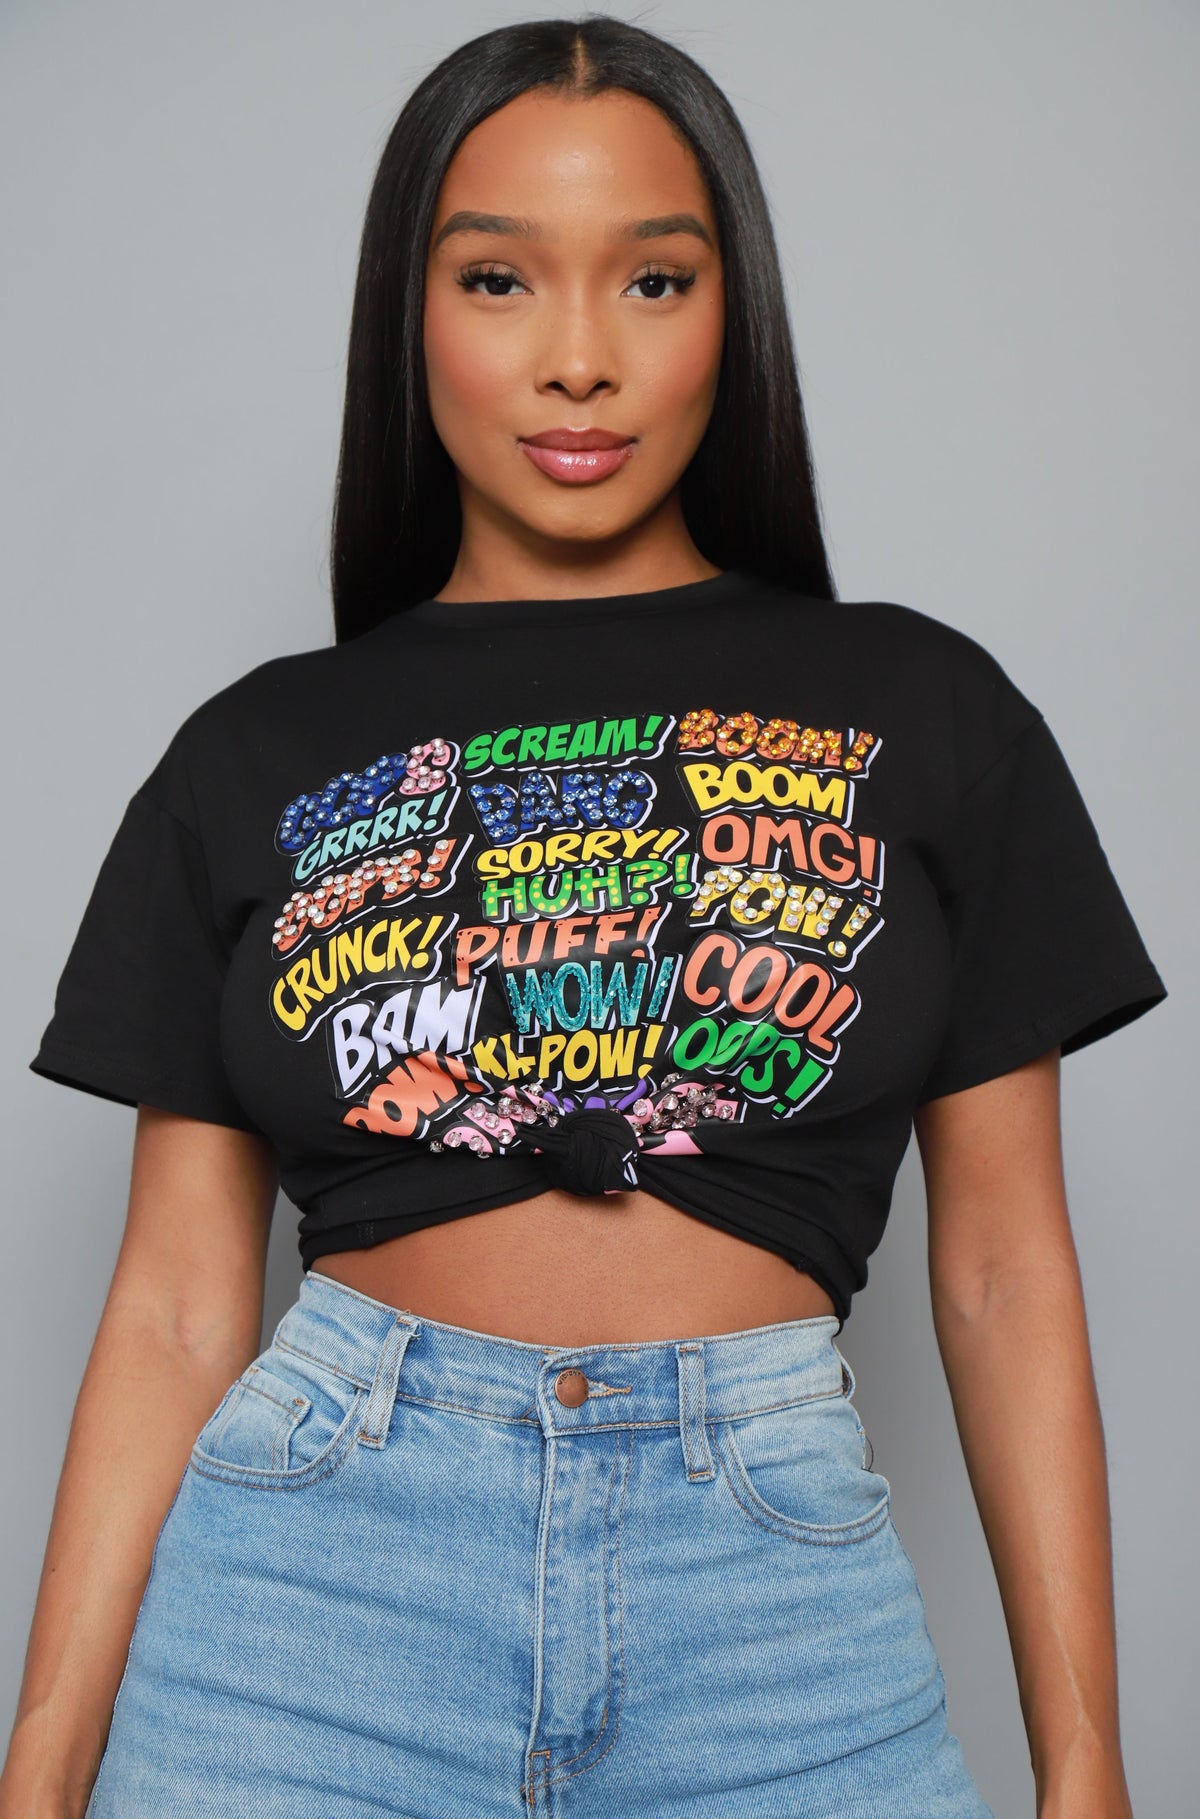 
              Shout Out Embellished Graphic Print T-Shirt - Black - Swank A Posh
            